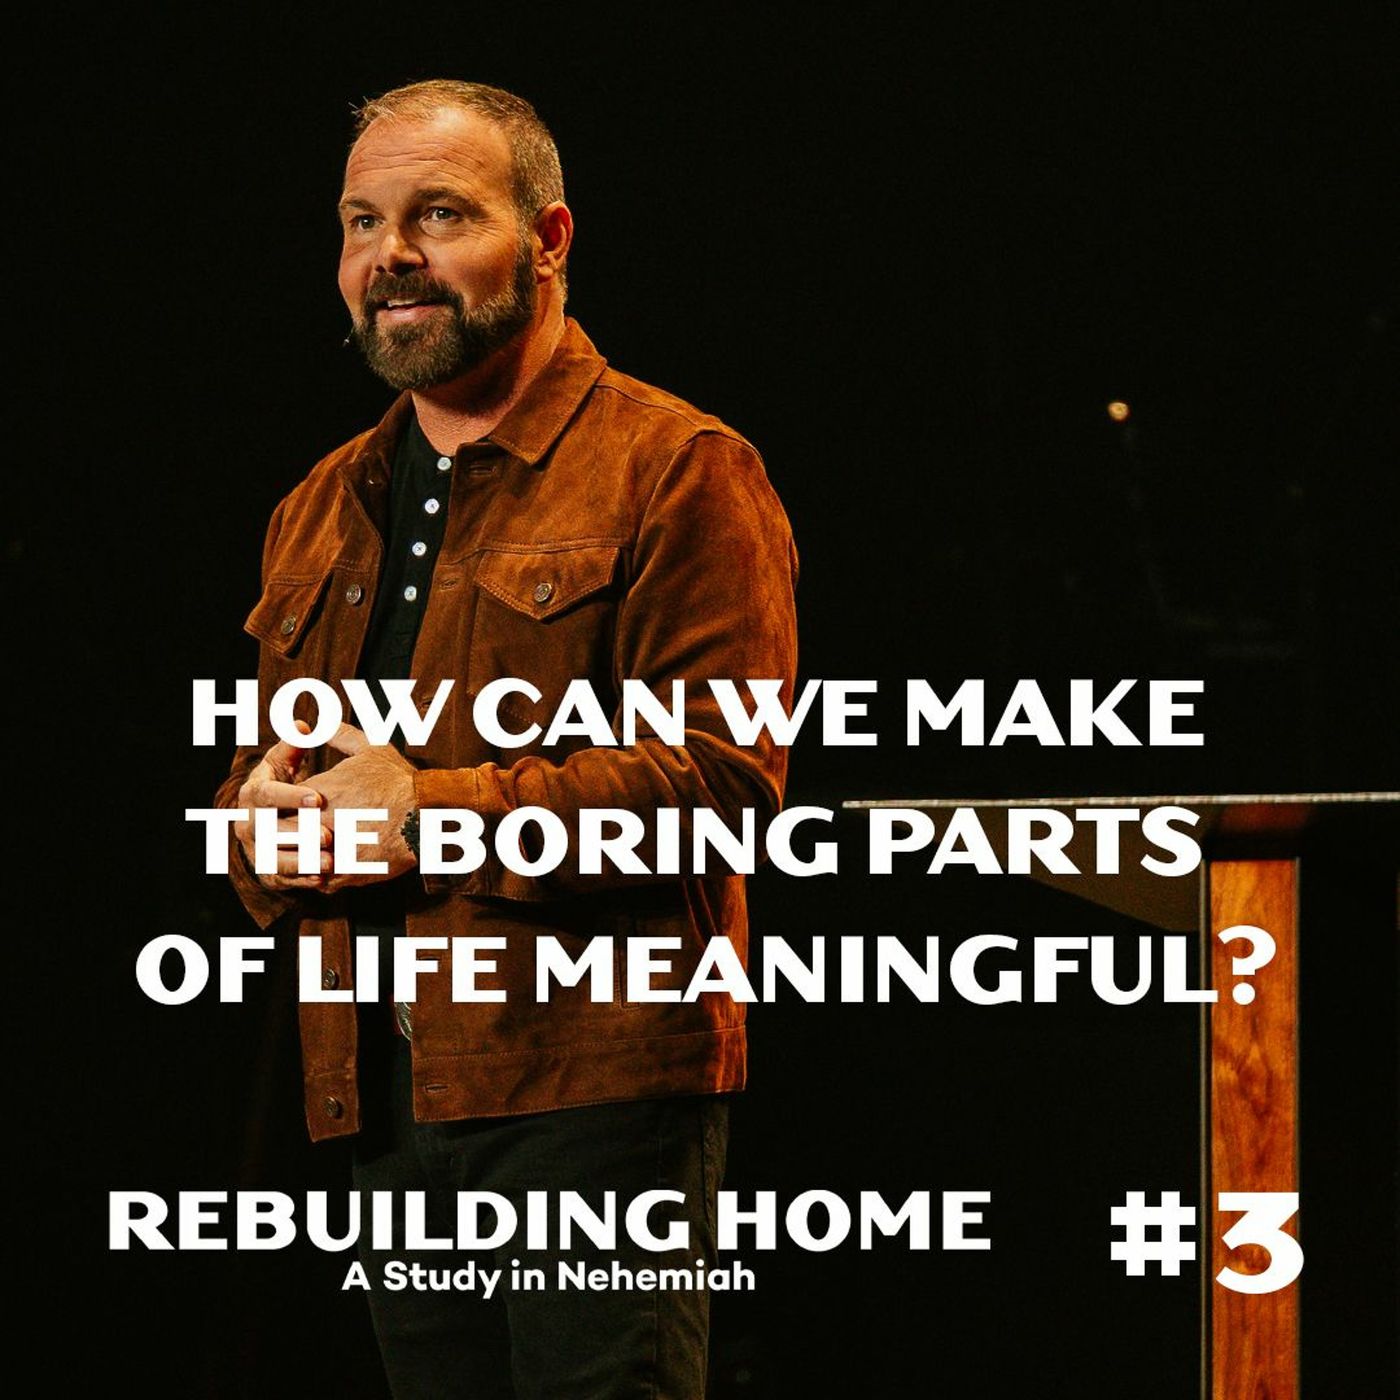 Nehemiah #3 - How can we make the boring parts of life meaningful?